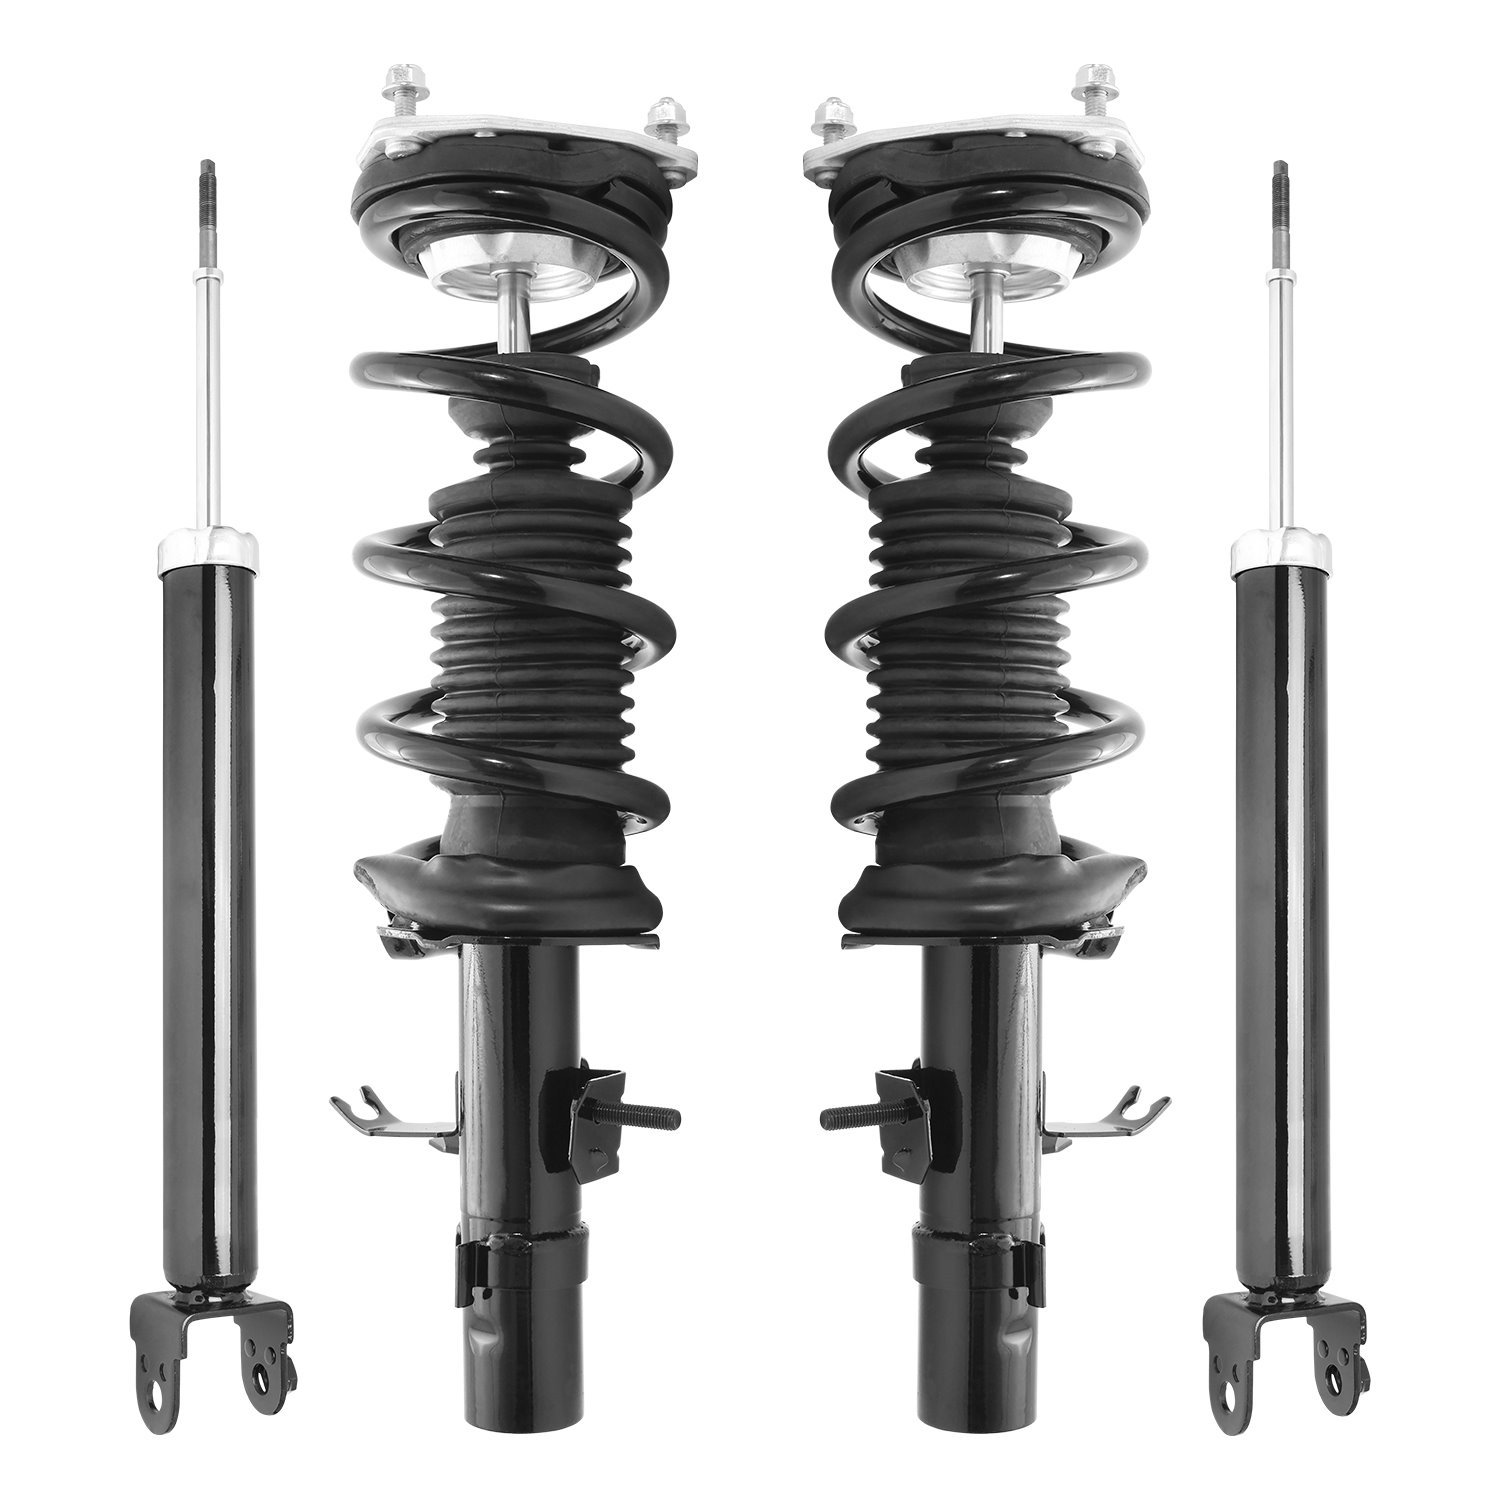 4-11407-255090-001 Front & Rear Suspension Strut & Coil Spring Assembly Fits Select Infiniti G37